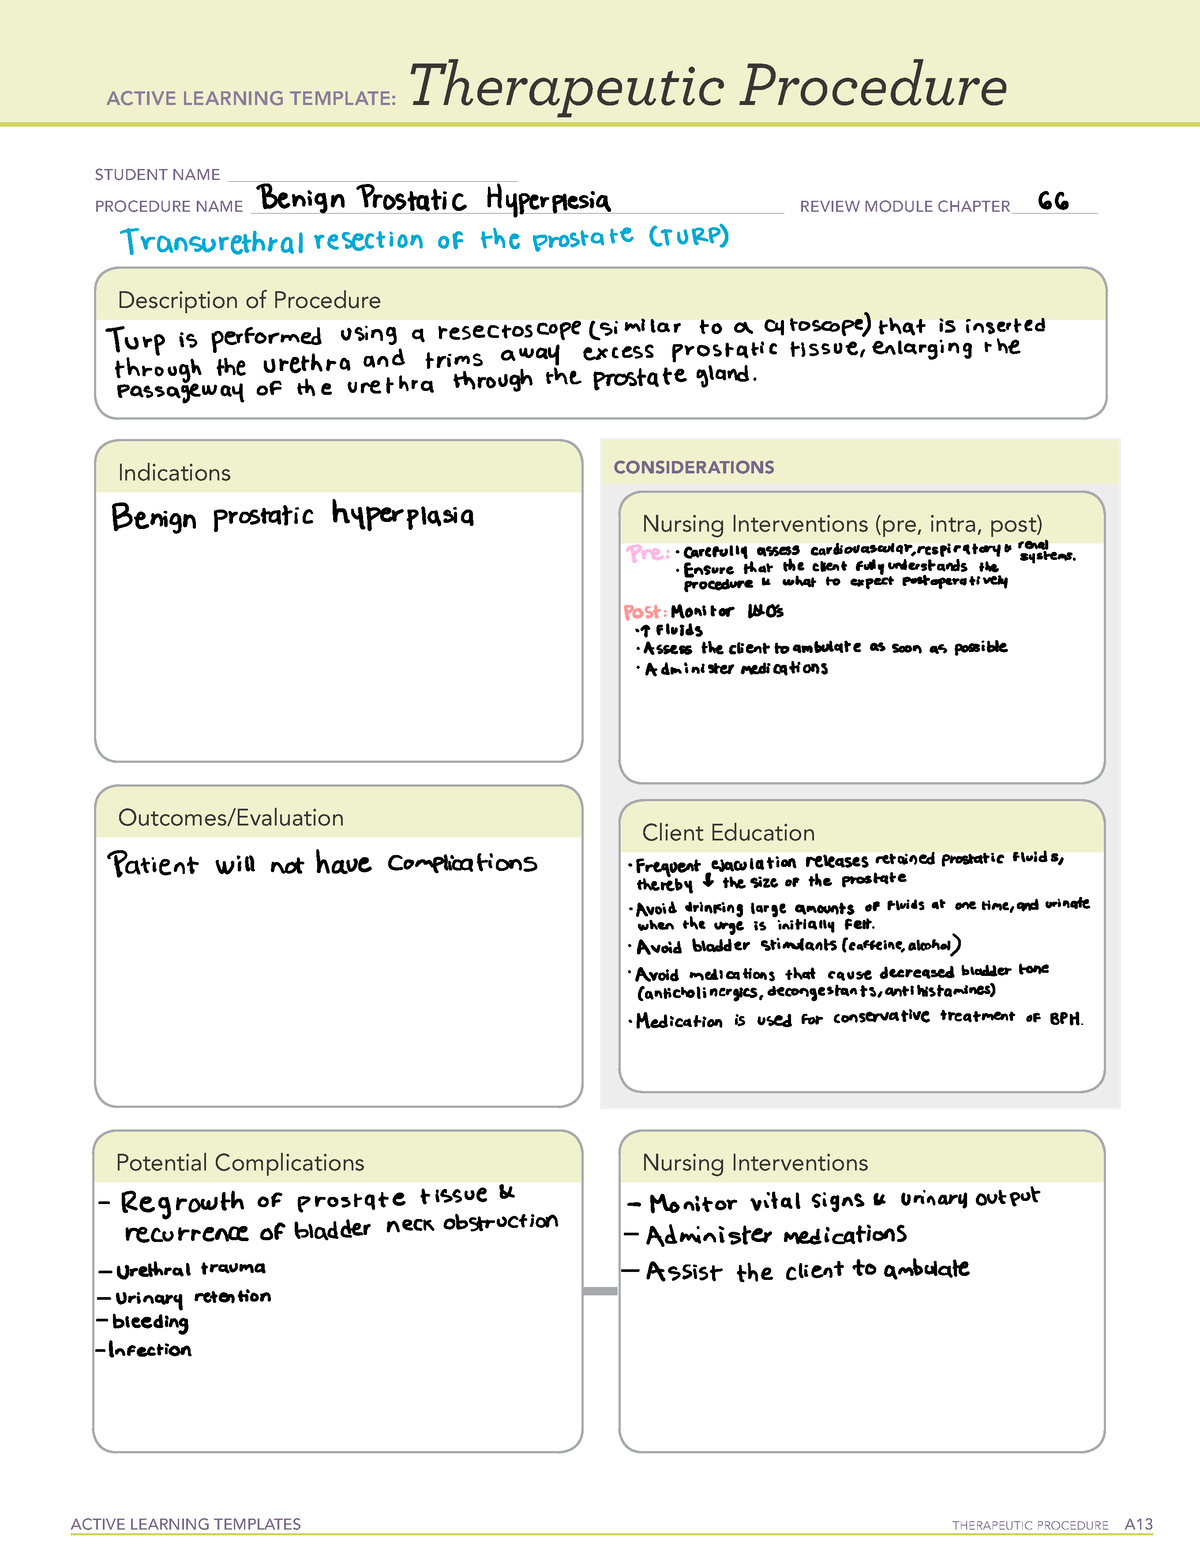 ati-templates-therapeudic-procedure-bph-active-learning-templates